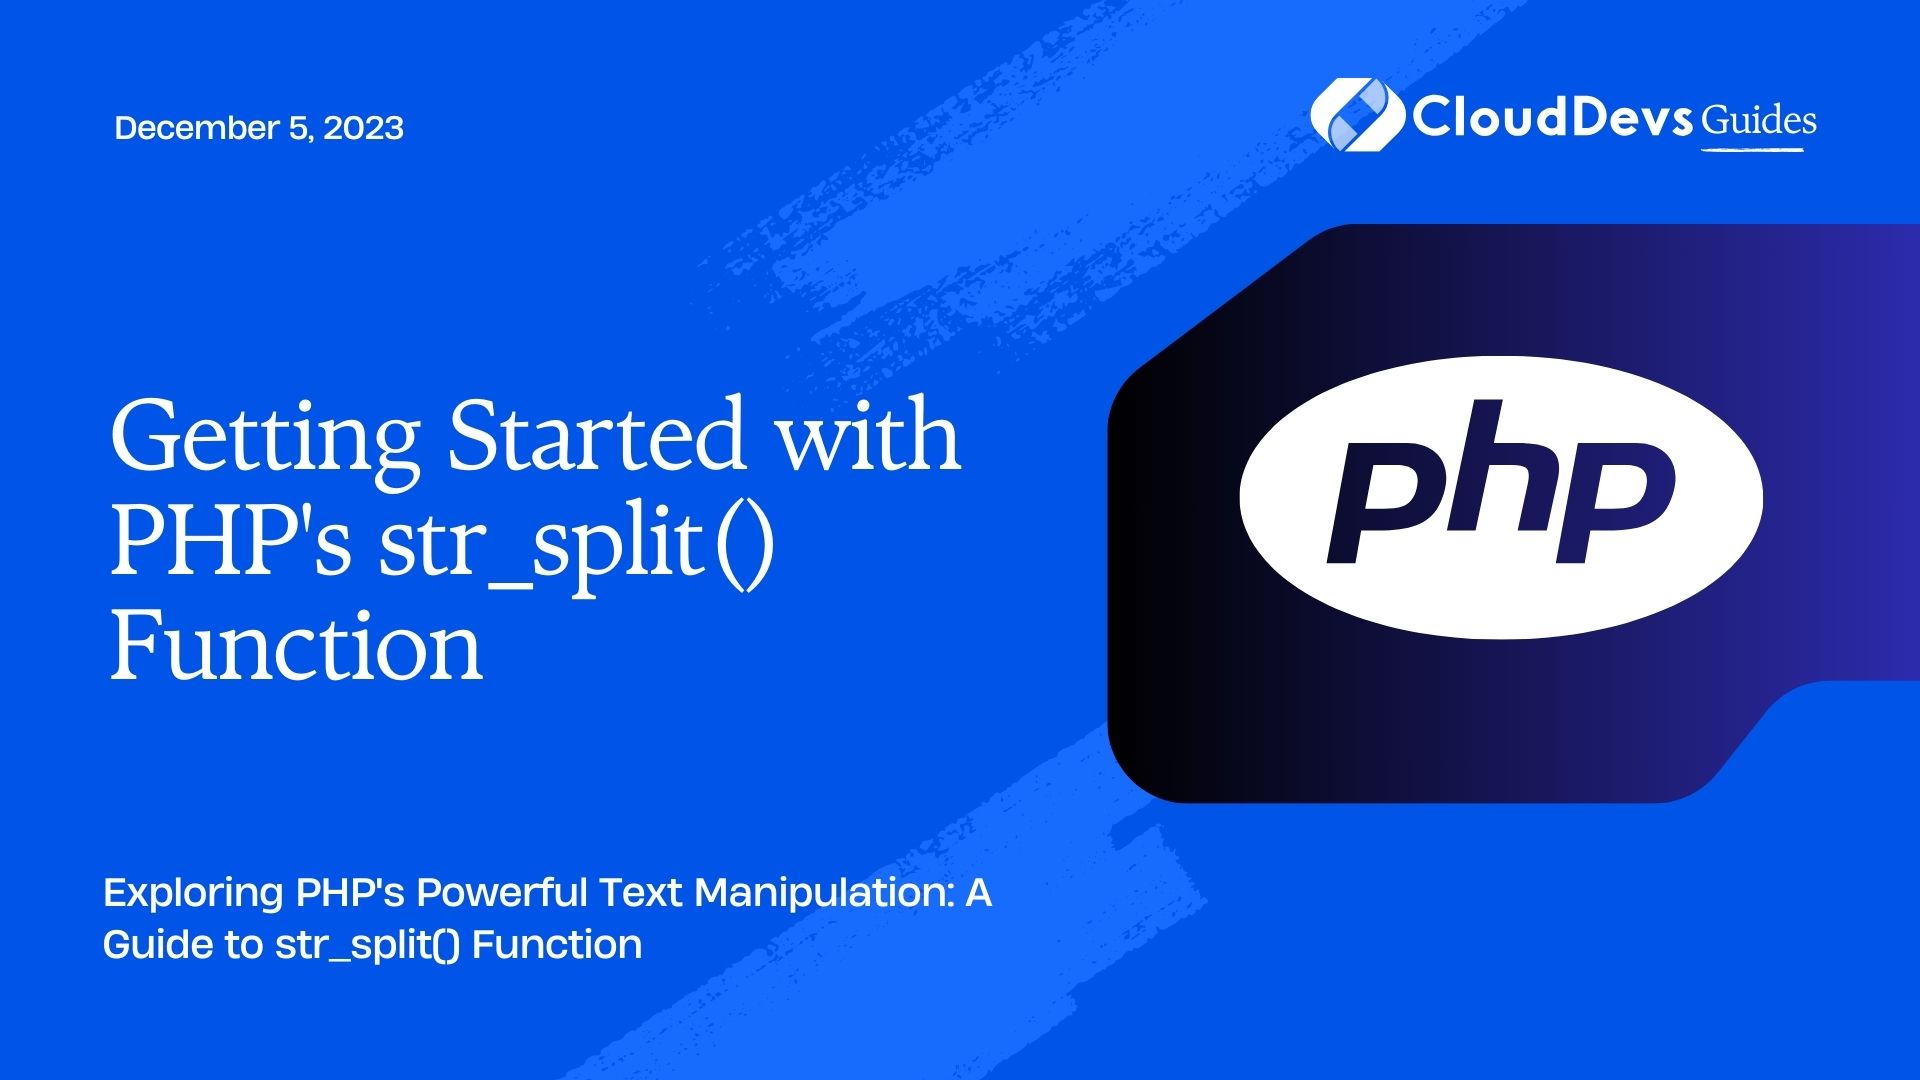 Getting Started with PHP's str_split() Function